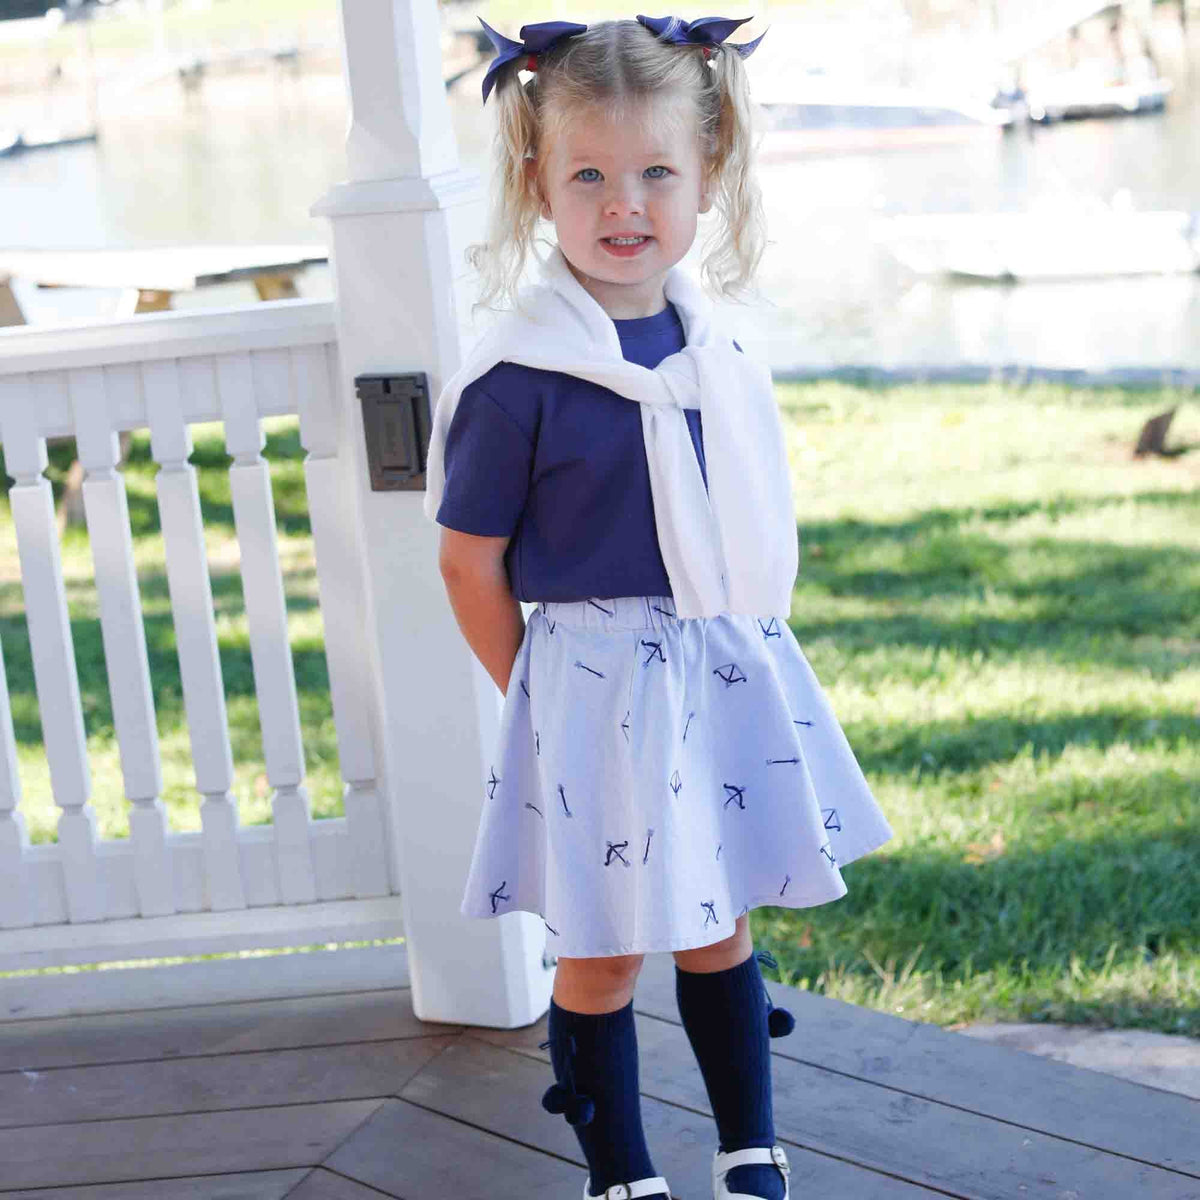 Classic and Preppy Regan Knee High Cable Socks with Pom Poms 3 Pack-Accessory-CPC - Classic Prep Childrenswear